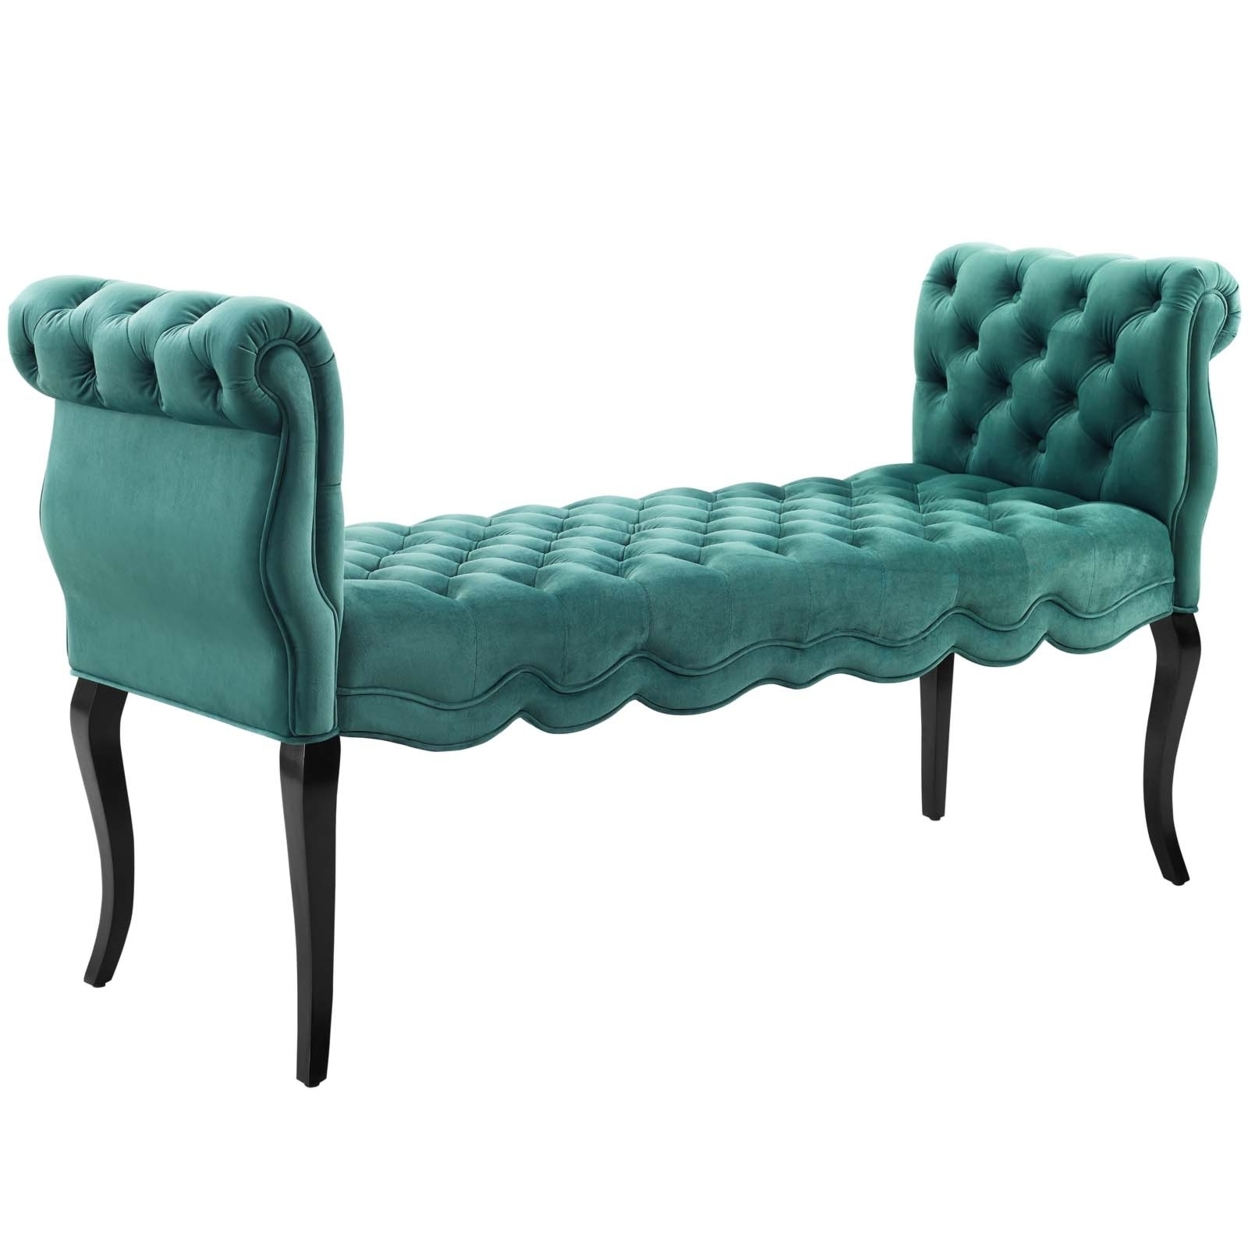 Adelia Chesterfield Style Button Tufted Performance Velvet Bench,Teal